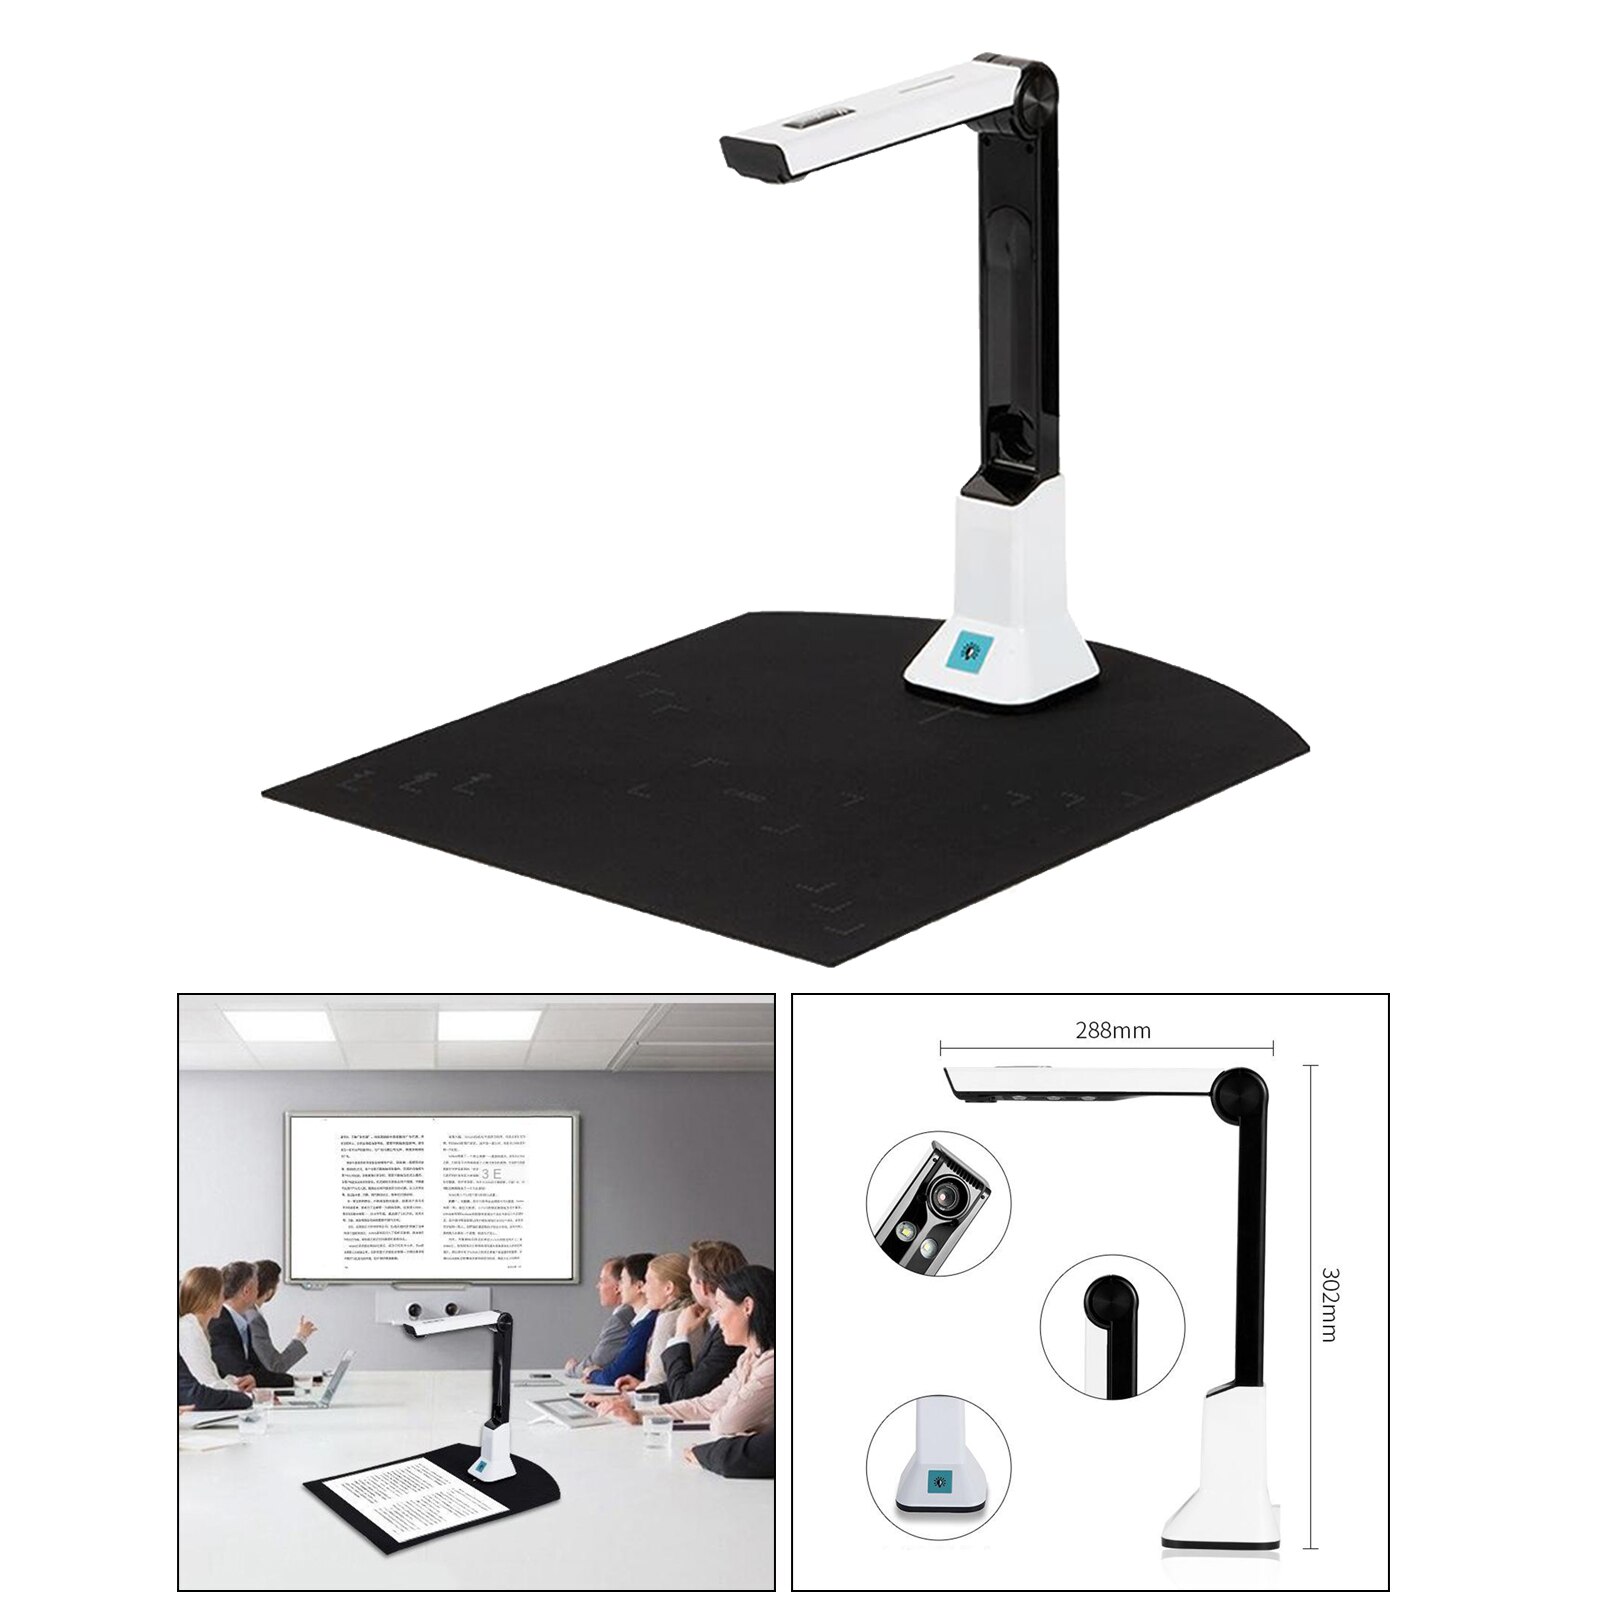 8MP HD A4 A5 Document Scanner real-time scanning For Picture Photos Magazine